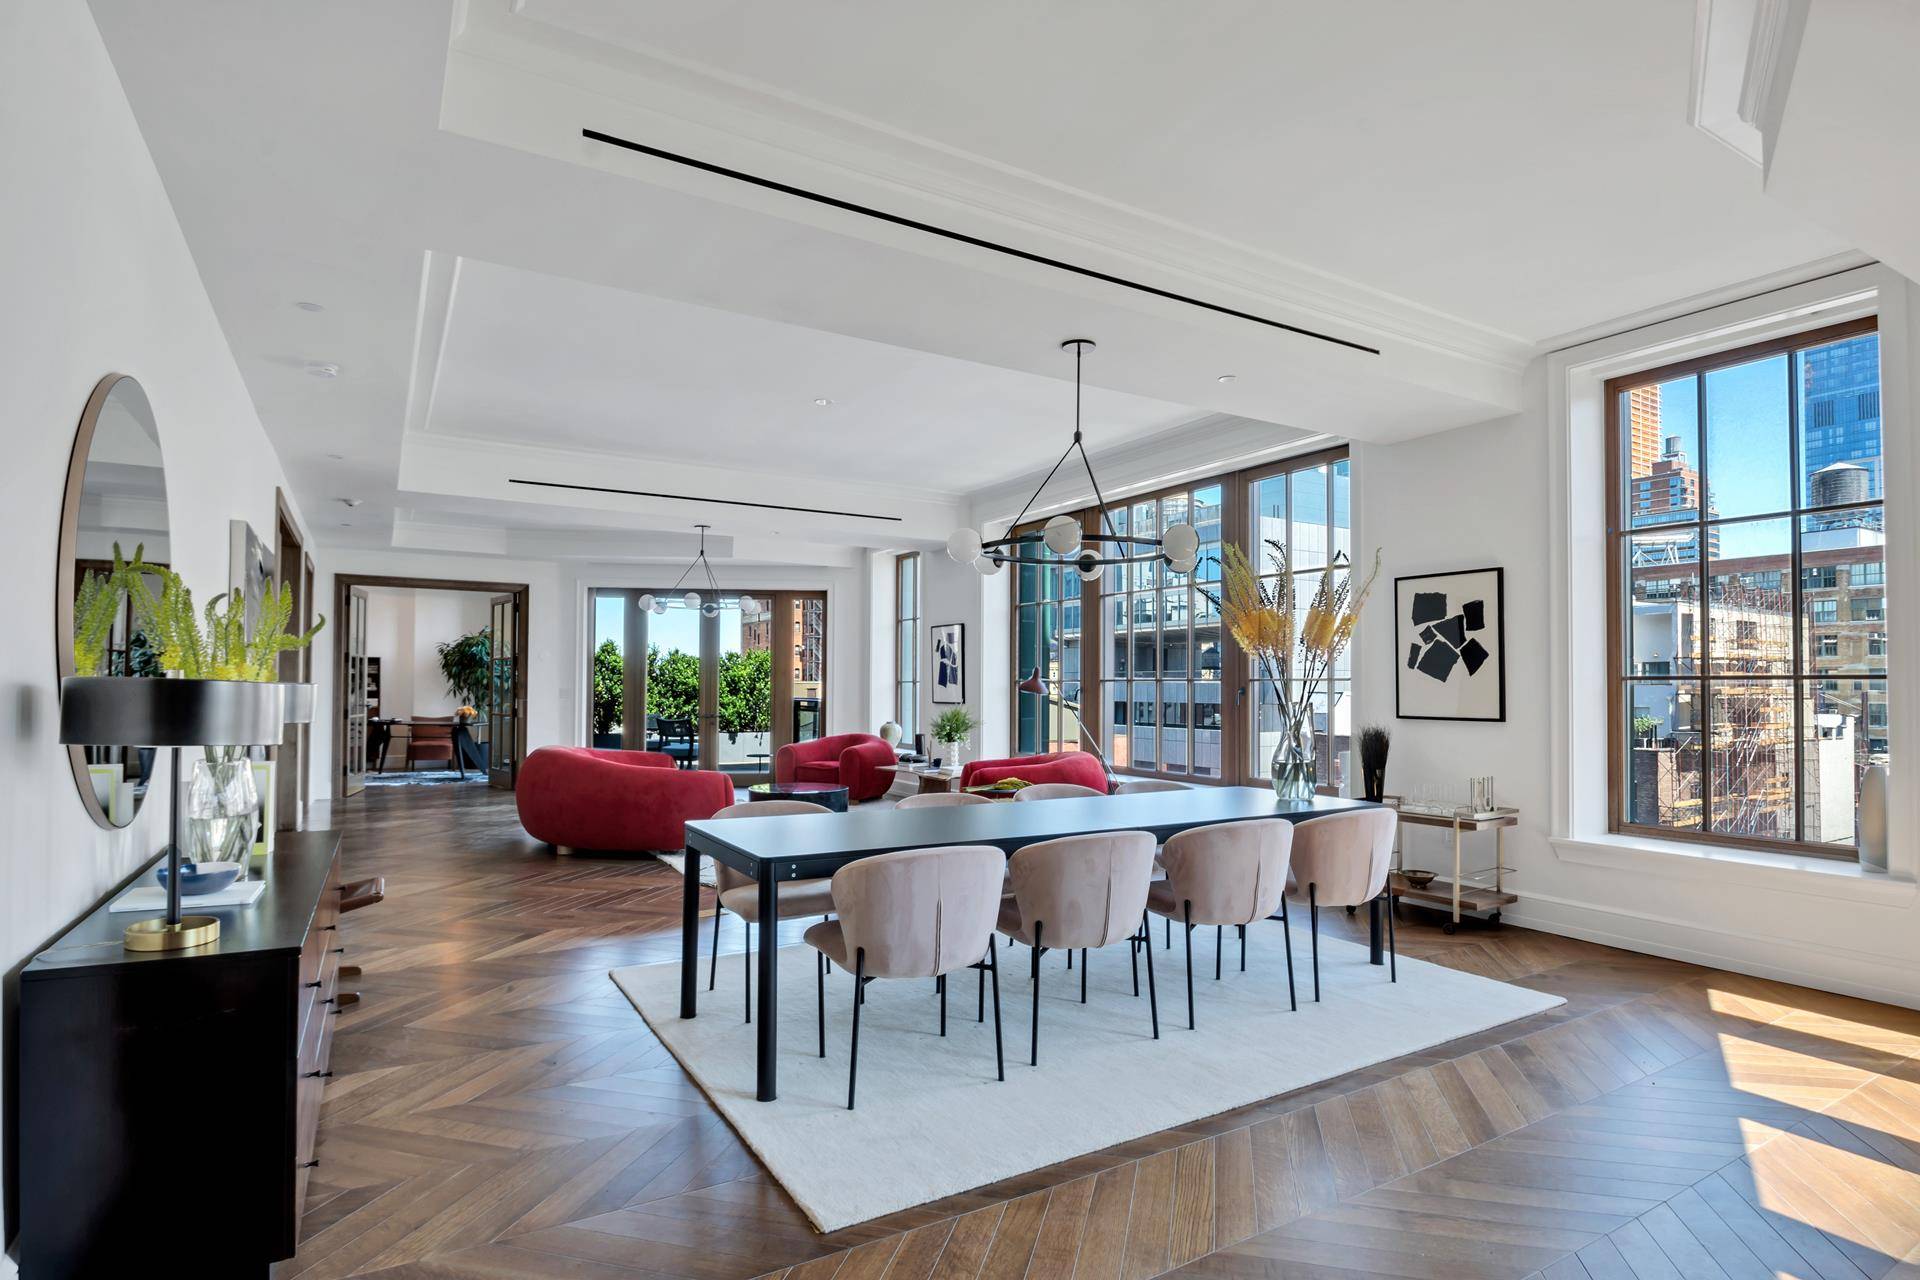 Impeccably crafted and designed by visionary design team Roman and Williams and developed by JDS Development Group, Residence 8 at The Fitzroy is a full floor, four bedroom, five and ...